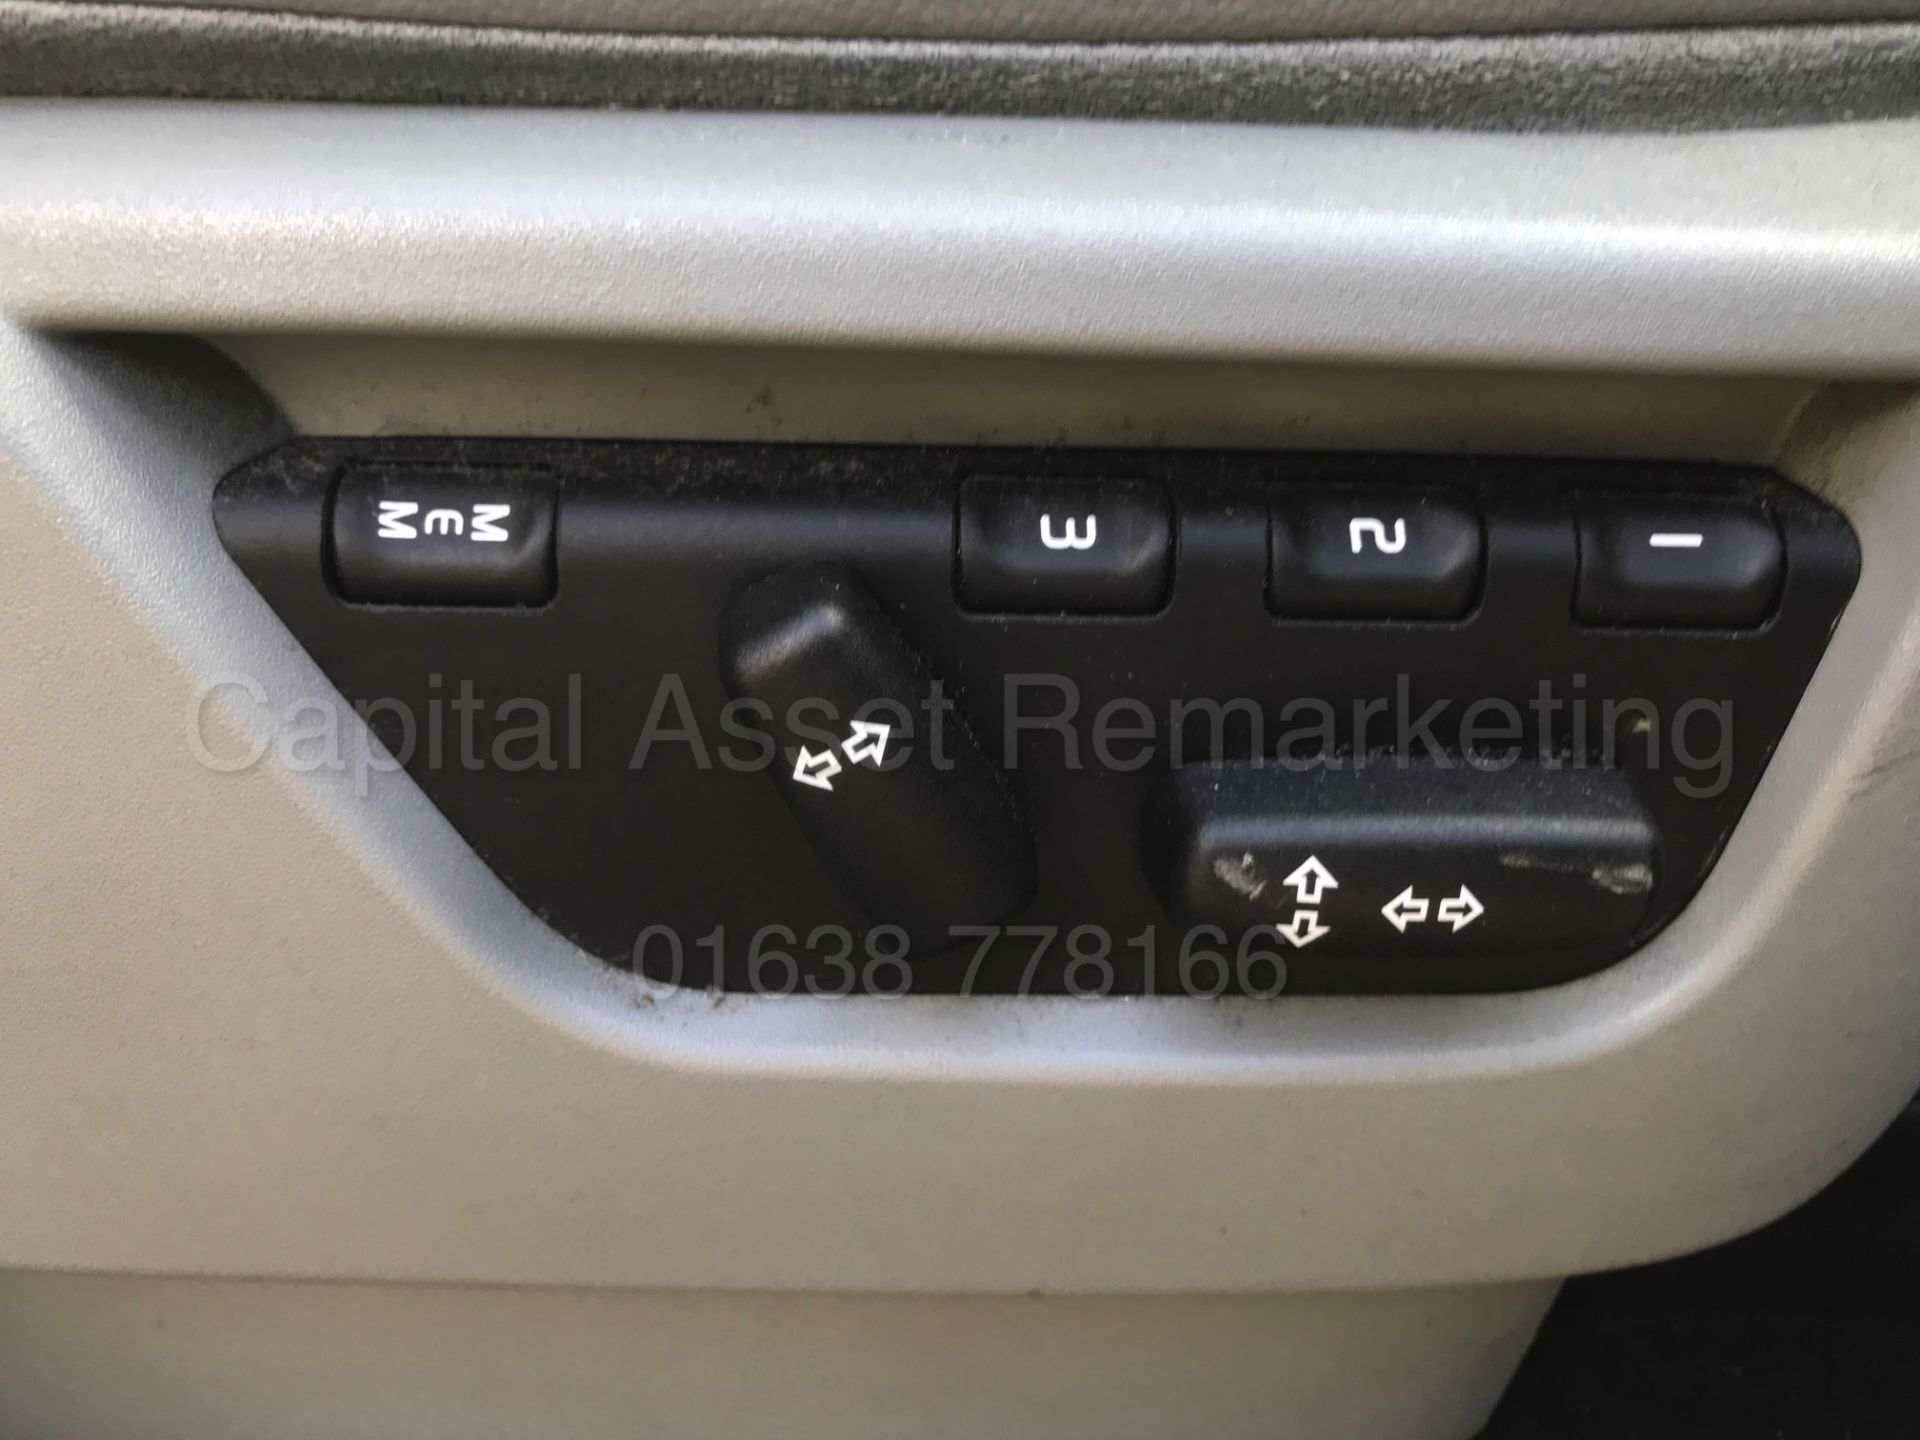 (On Sale) LAND ROVER FREELANDER 'HSE EDITION' (2011) '2.2 SD4 - AUTO' *SAT NAV - LEATHER - PAN ROOF* - Image 35 of 45